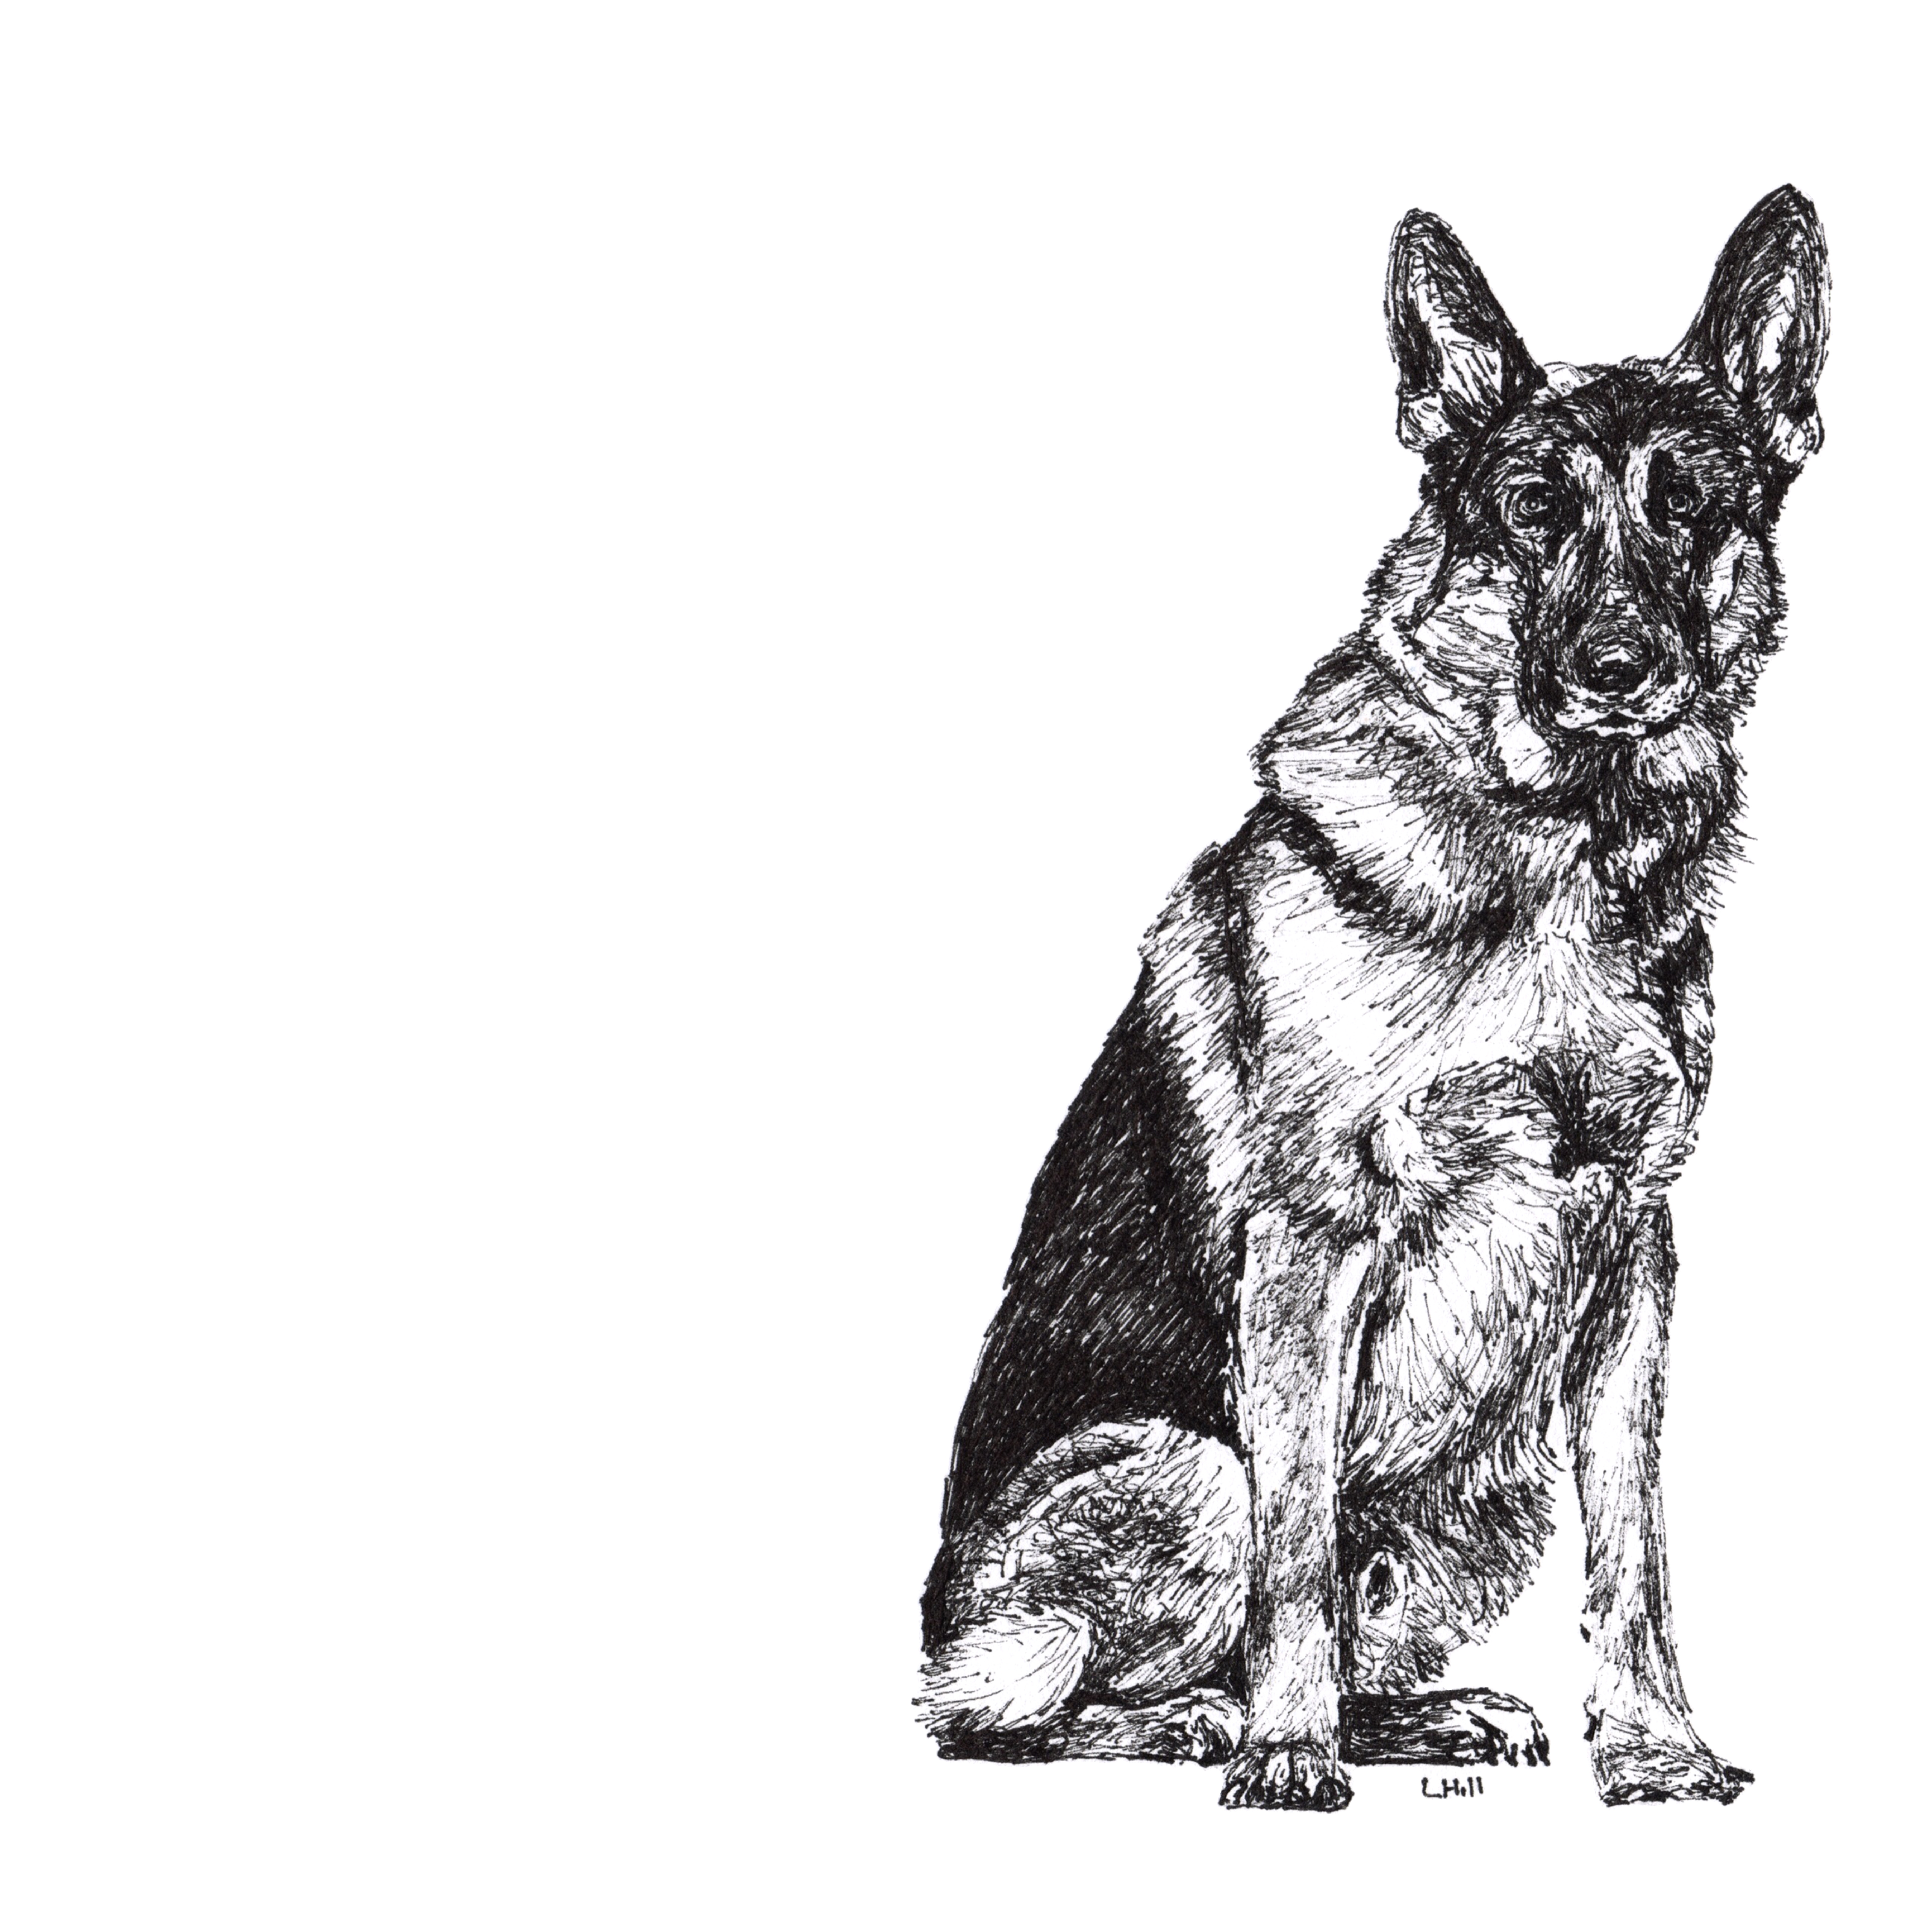 German Shepherd pen and ink illustration by Louisa Hill